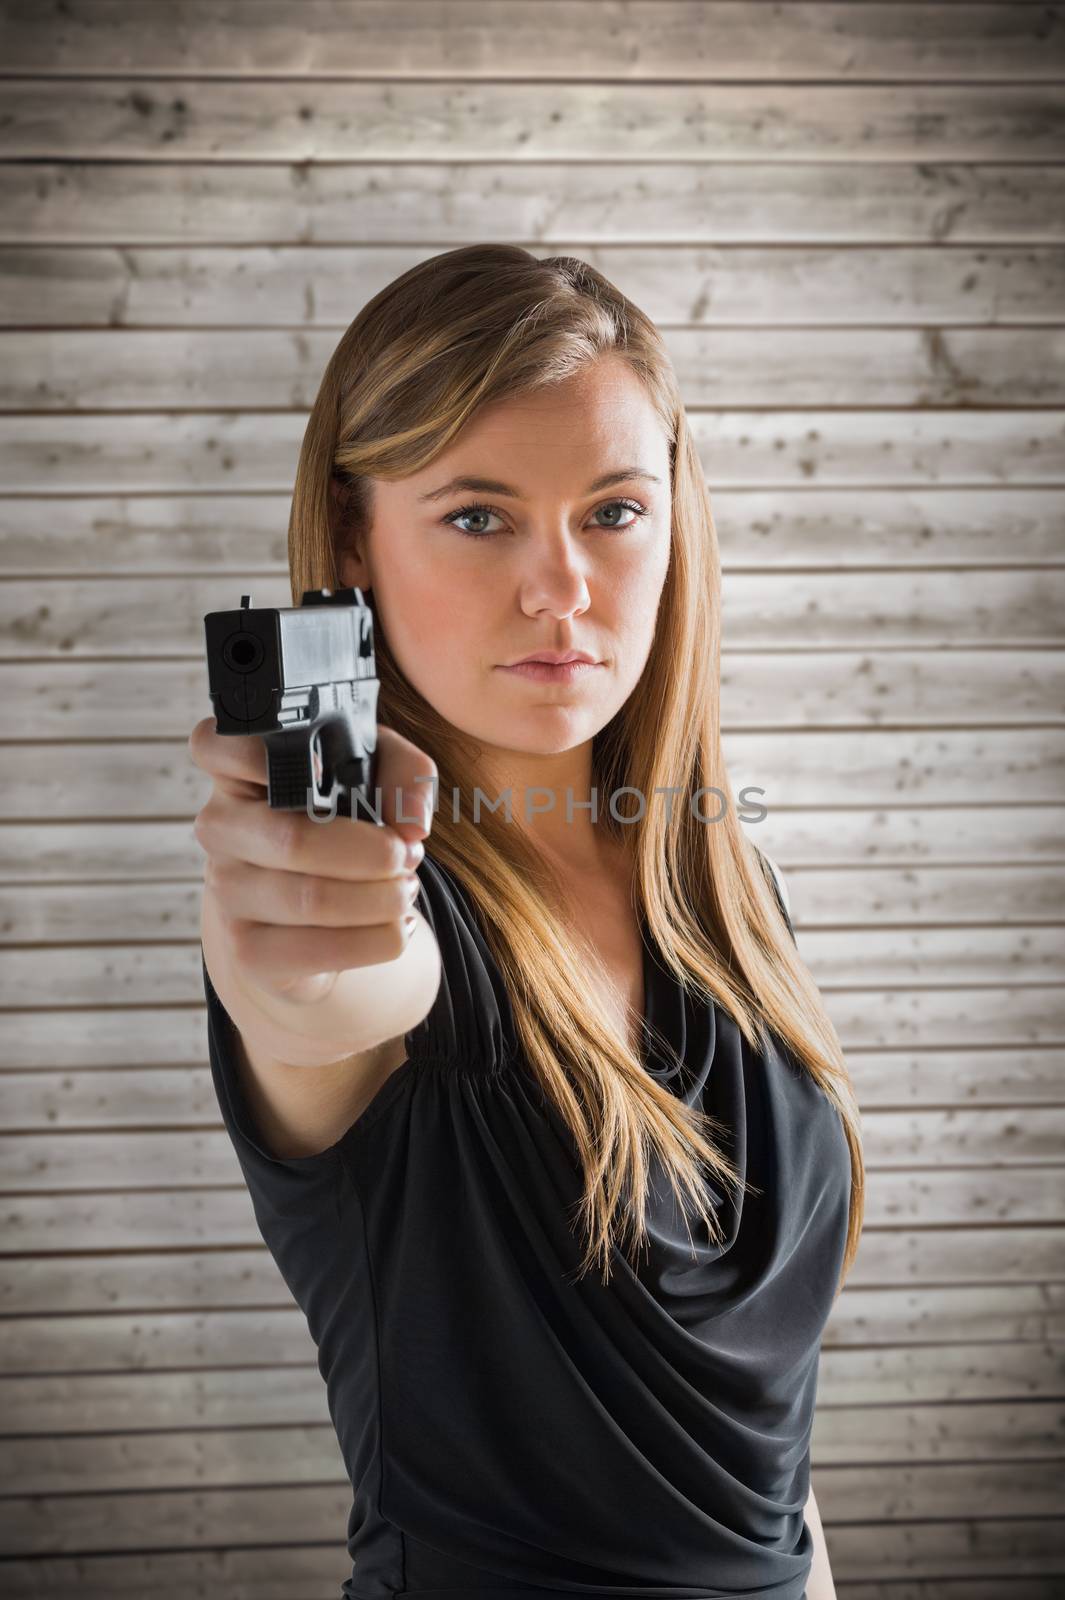 Composite image of femme fatale pointing gun at camera by Wavebreakmedia